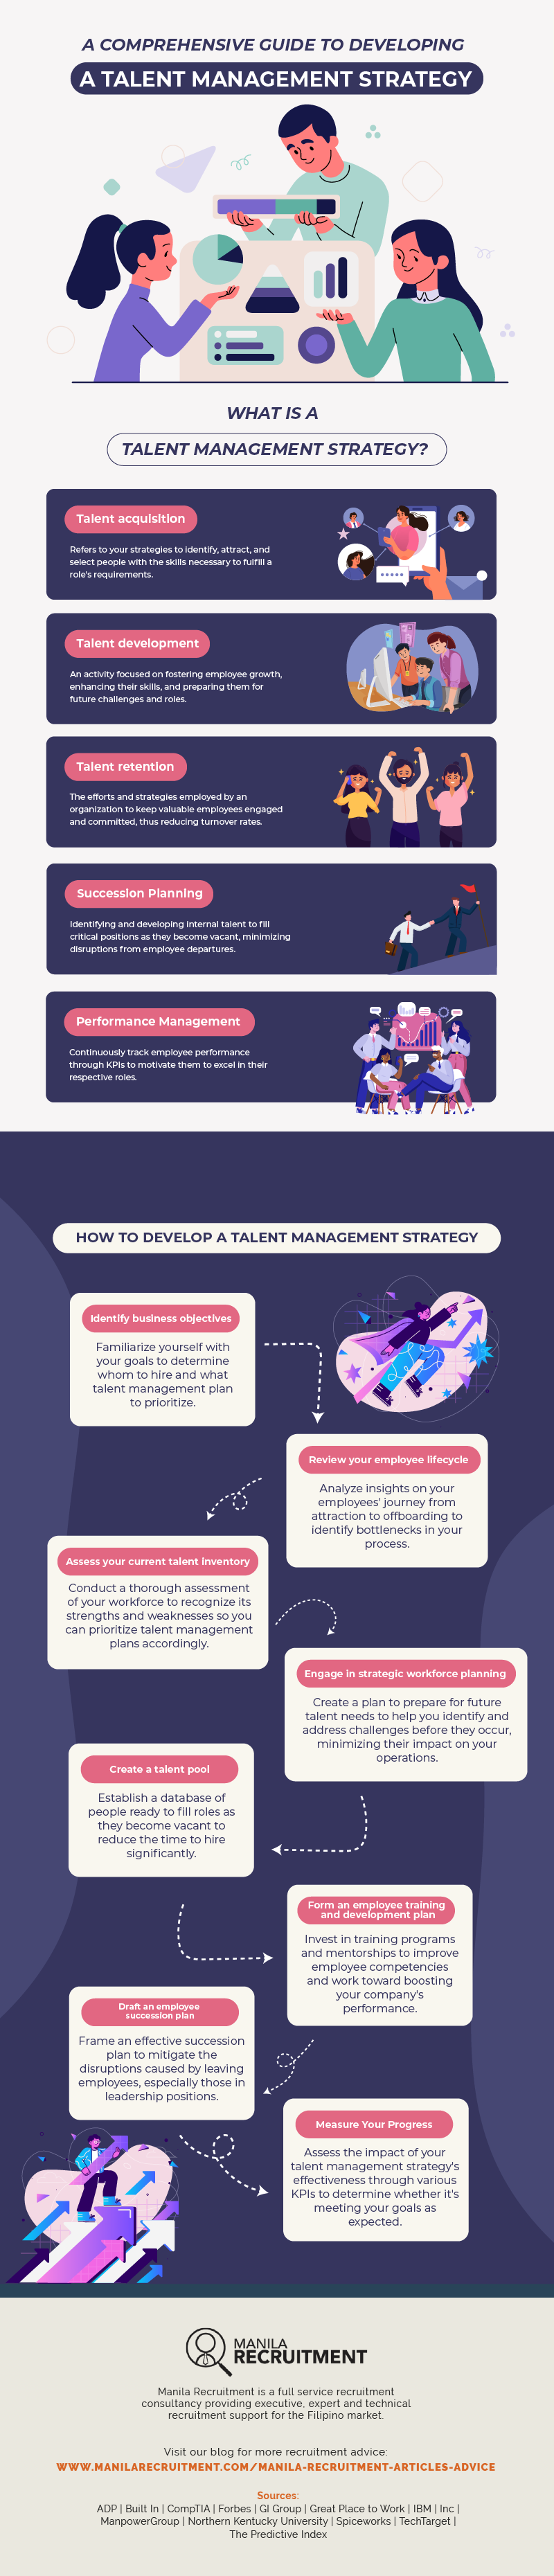 developing a talent management strategy infographic